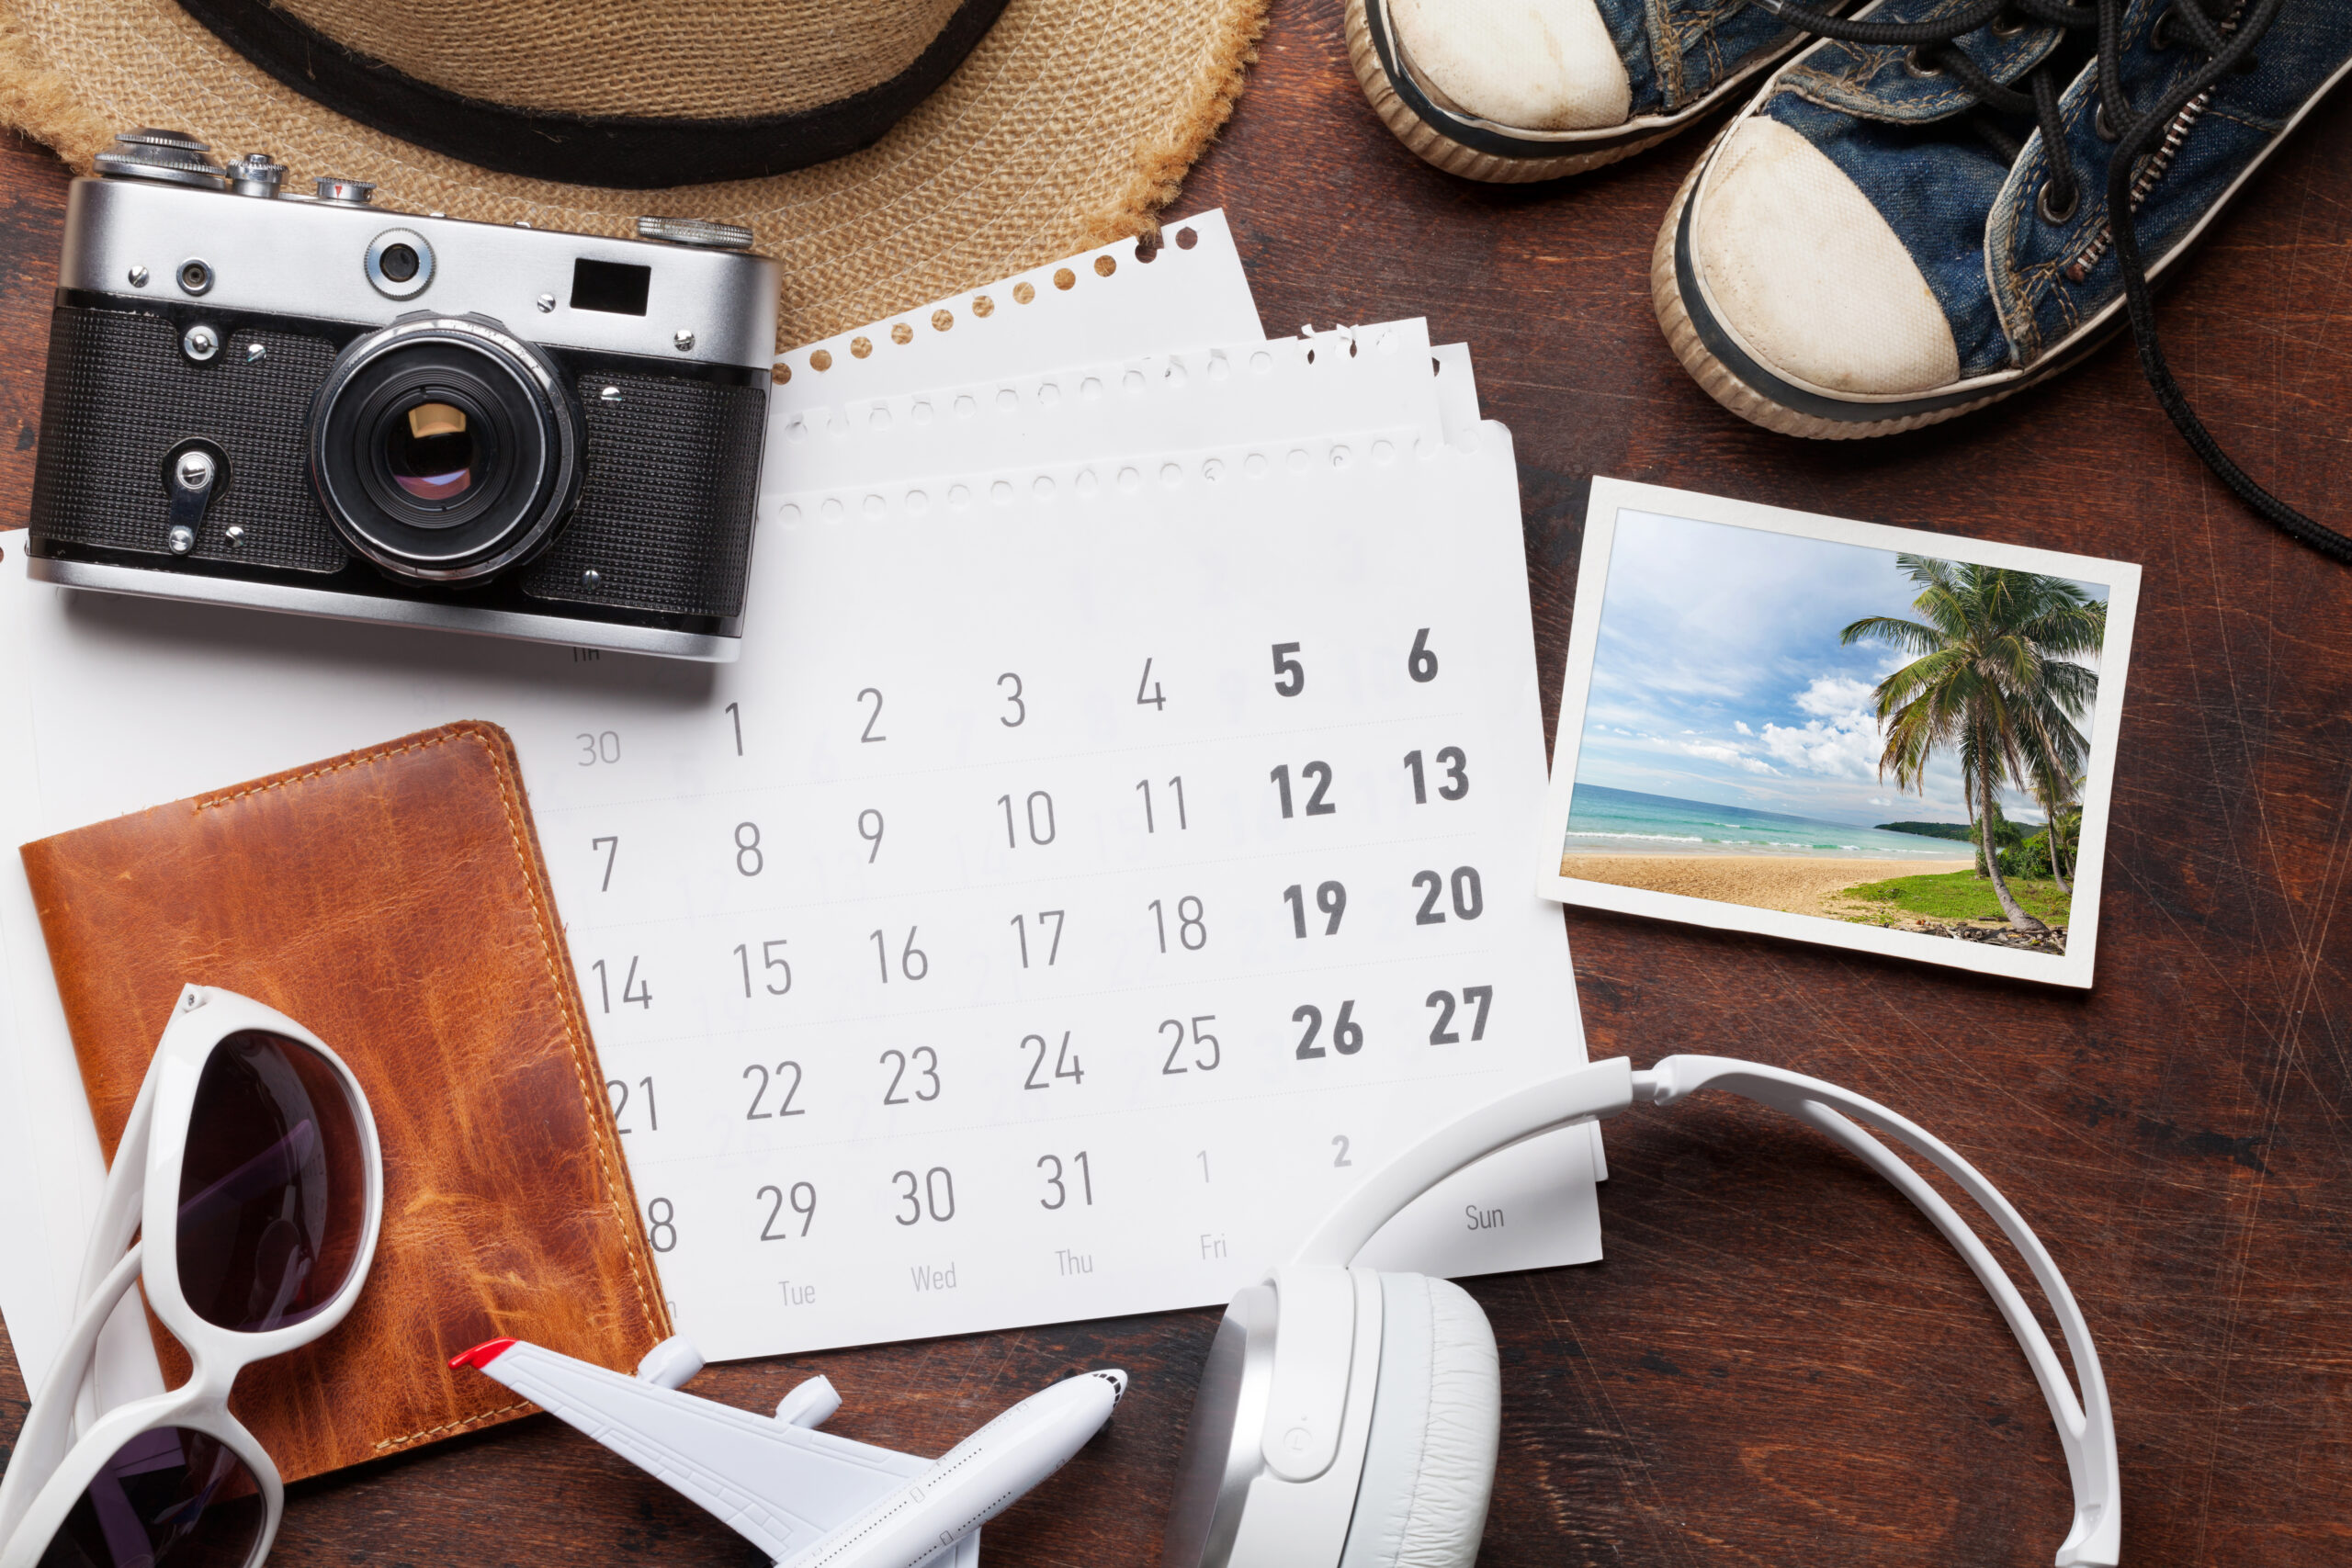 Image is a travel vacation concept with accessories, headphones, beach hat, camera, passport, airplane toy, calendar and photo.